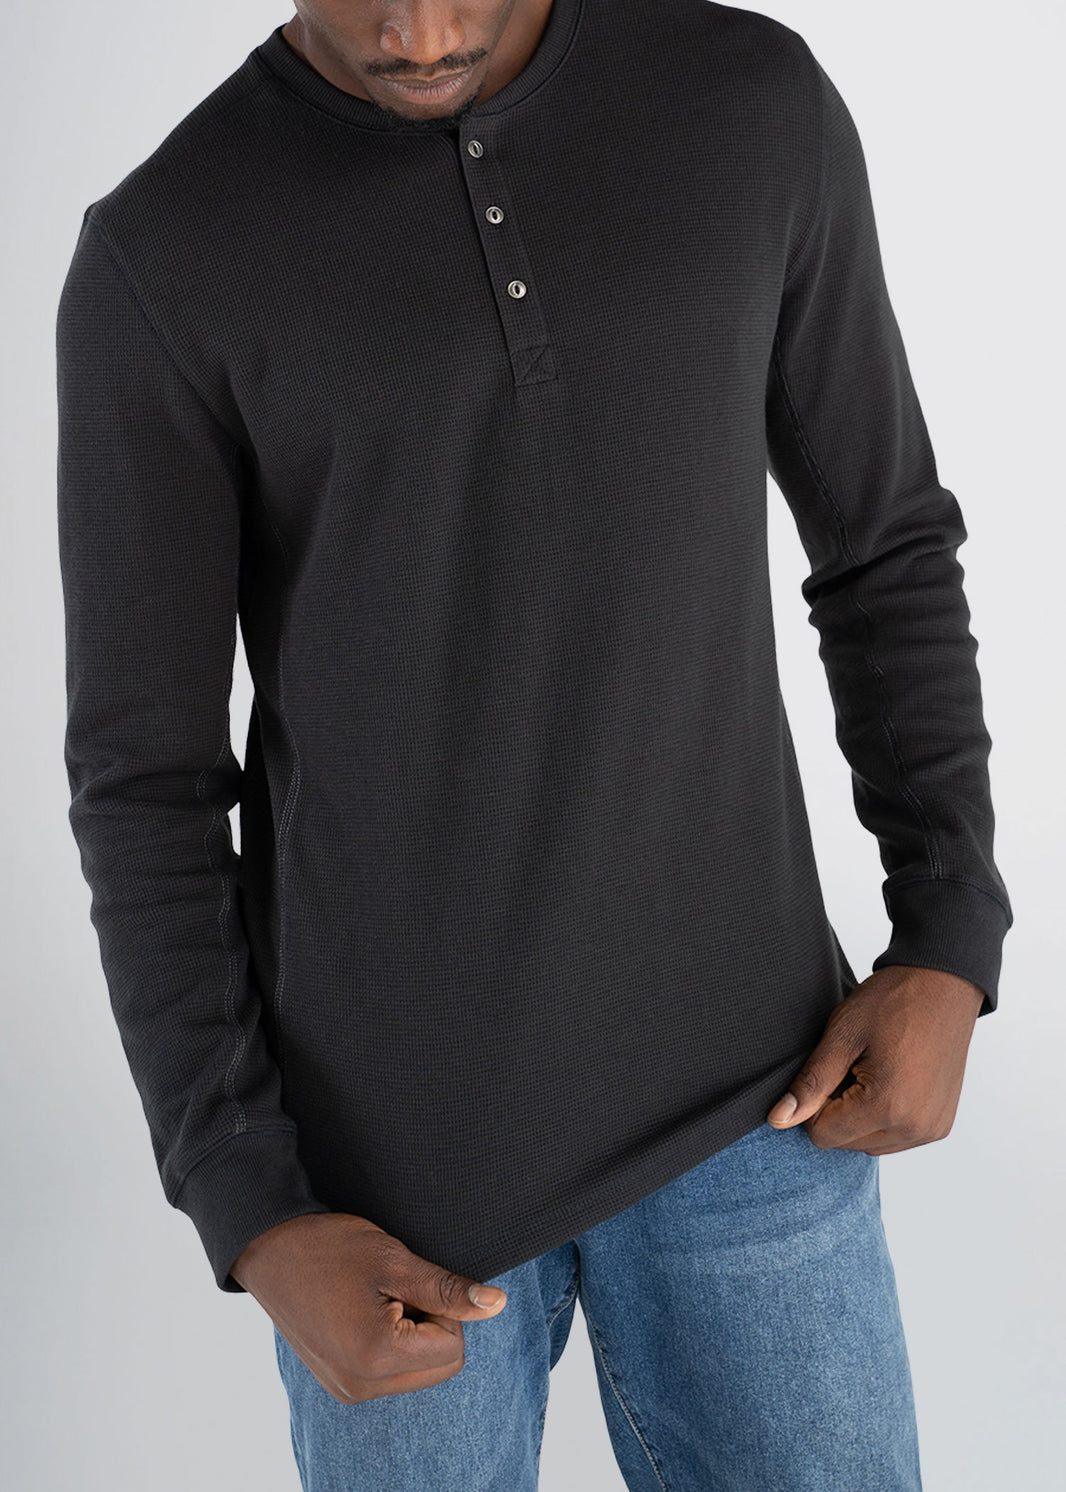 Tall Long Sleeve Shirts for Men 6'3